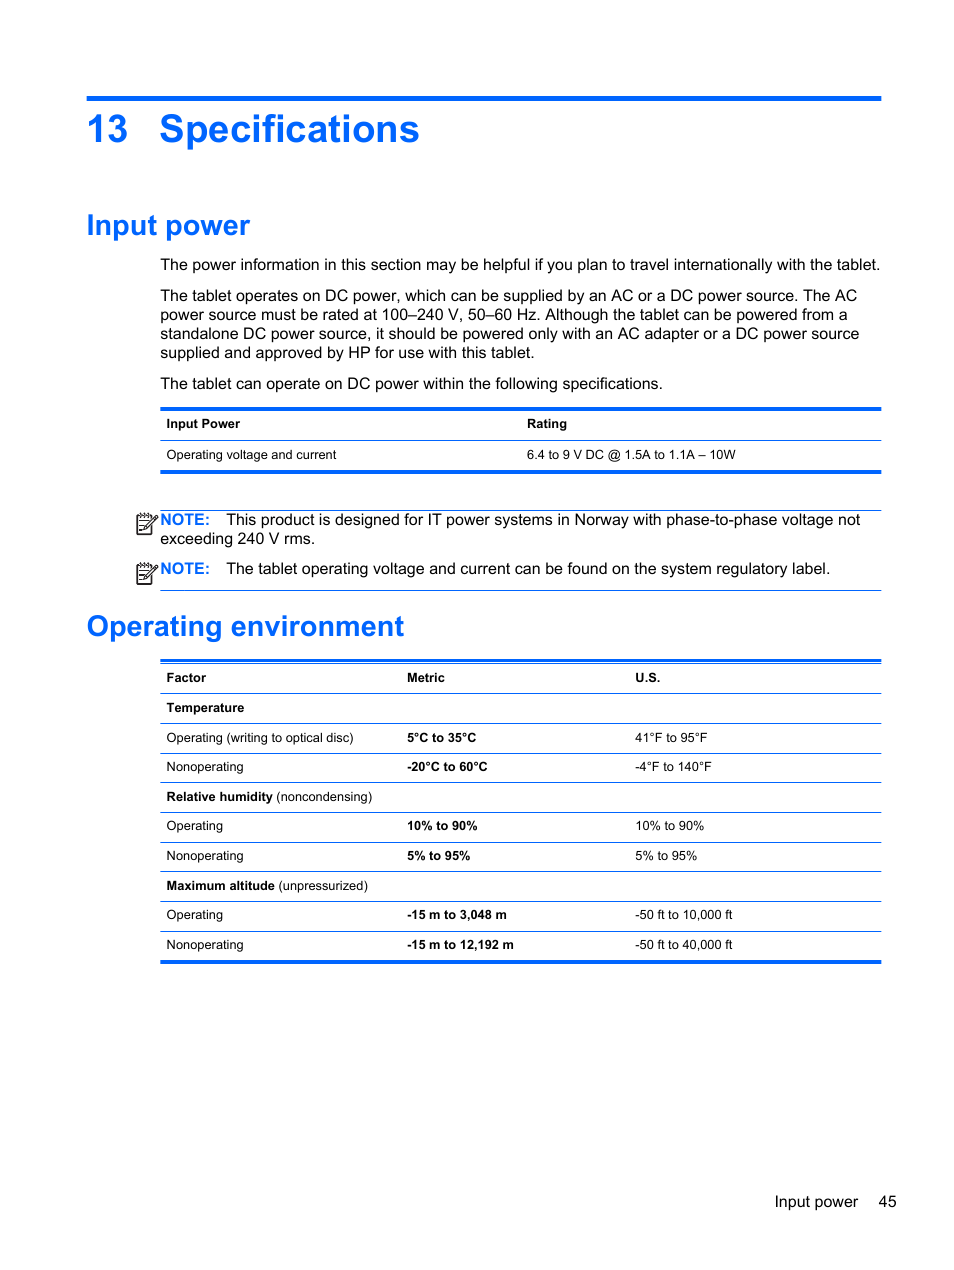 Specifications, Input power, Operating environment | HP ElitePad 900 G1